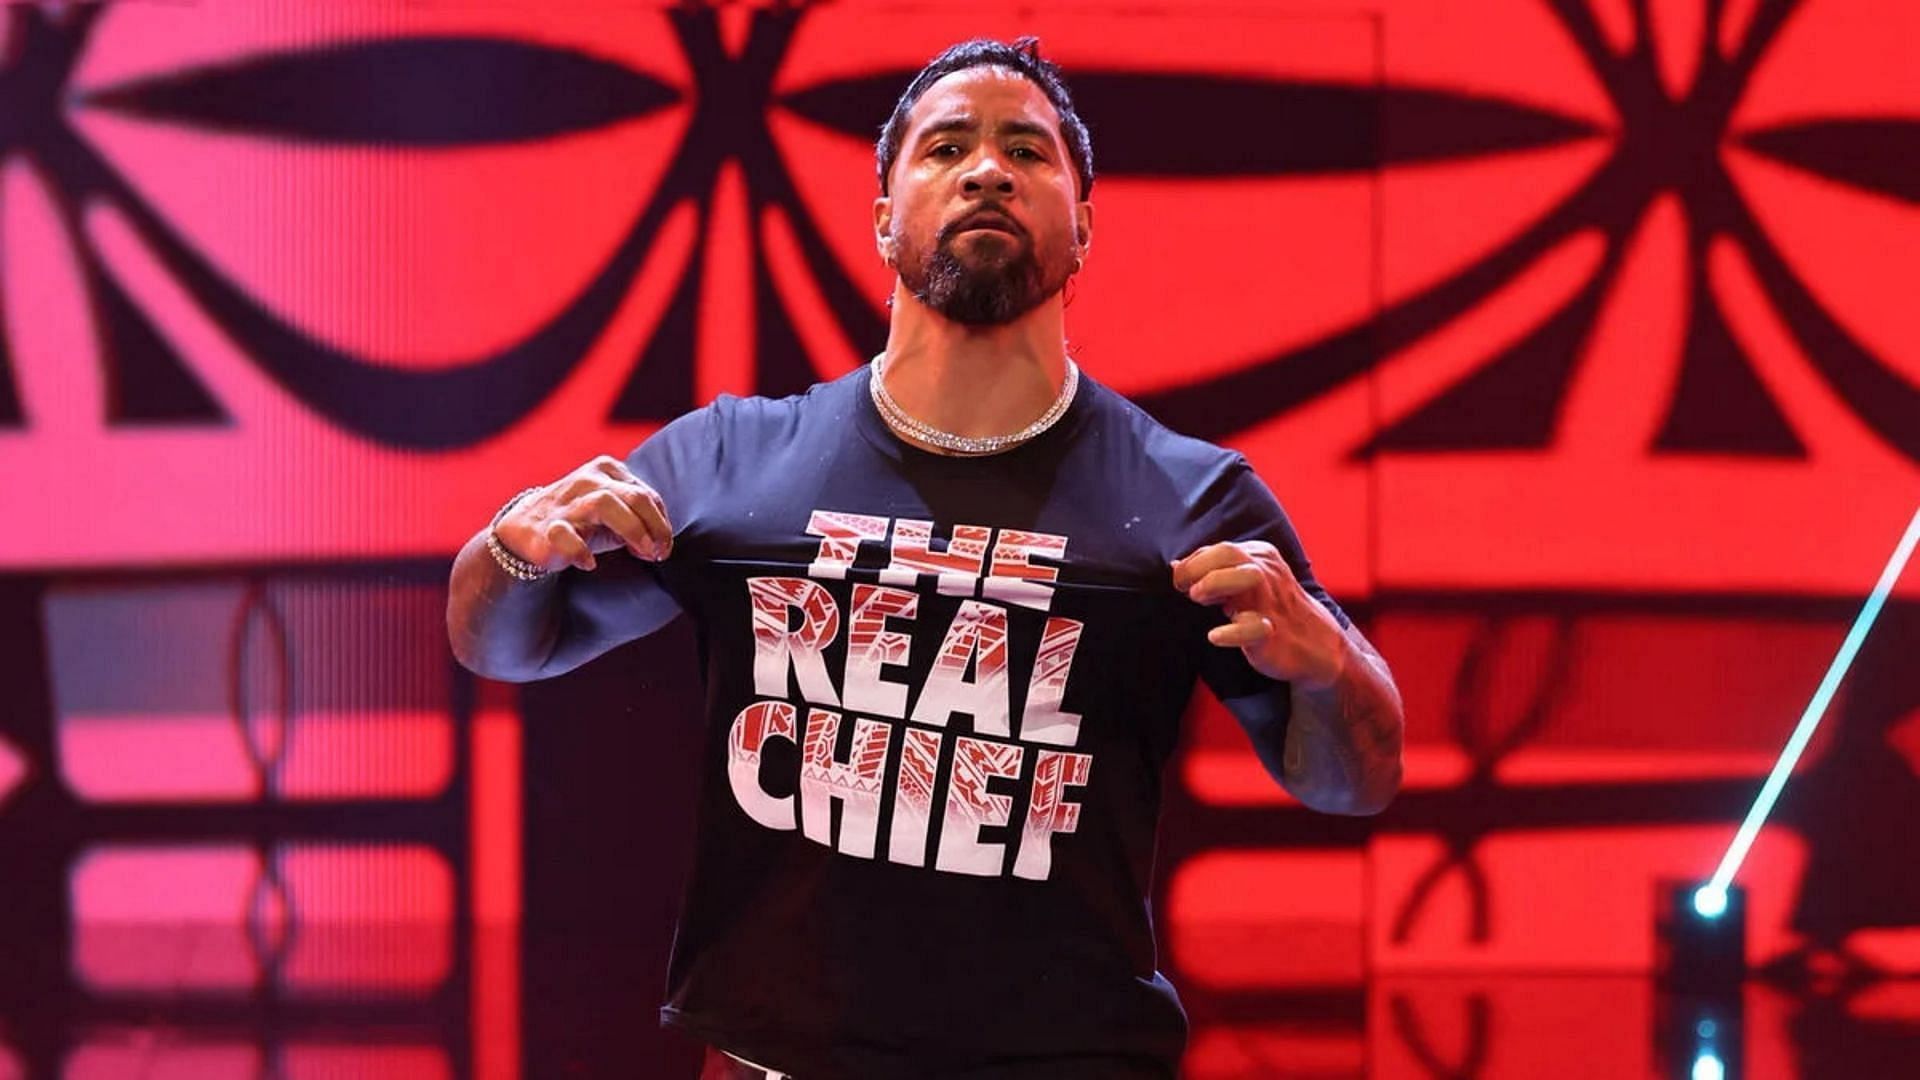 Jey Uso looks all set to conquer RAW as well